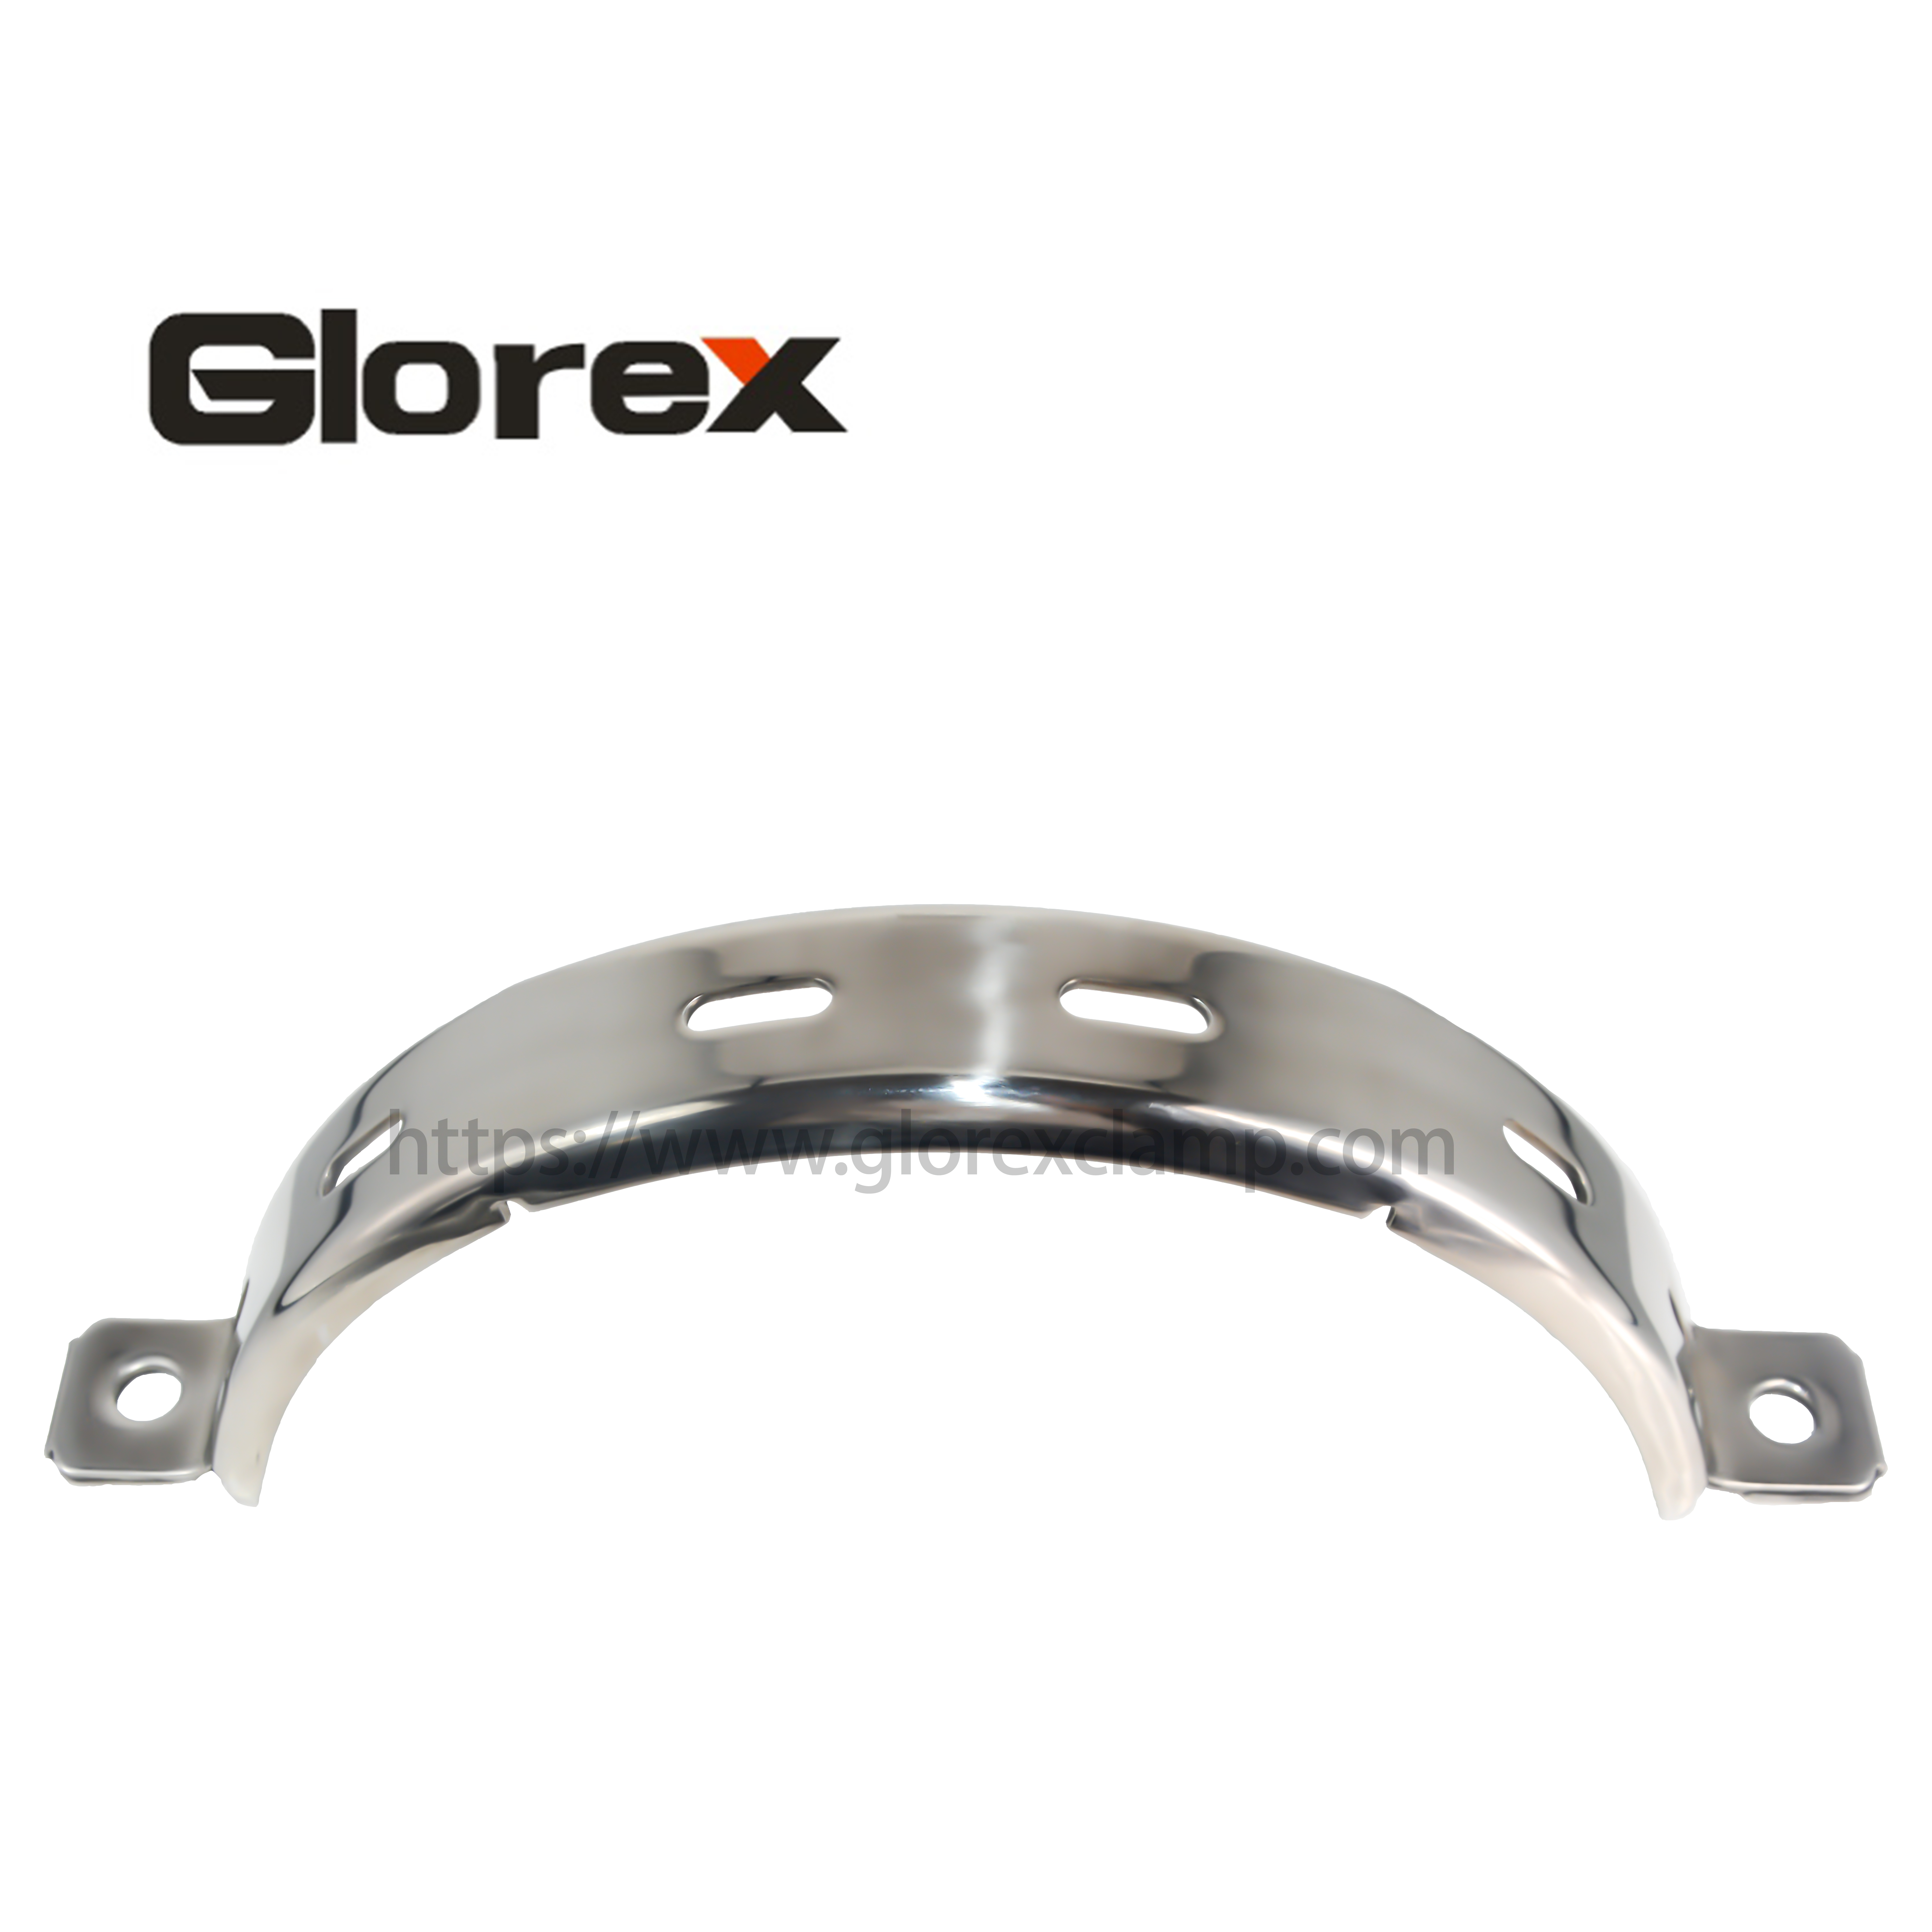 Hot sale Factory Made in China Heavy Duty Glassdoor Glass Clamp - Pipe clamp – Glorex